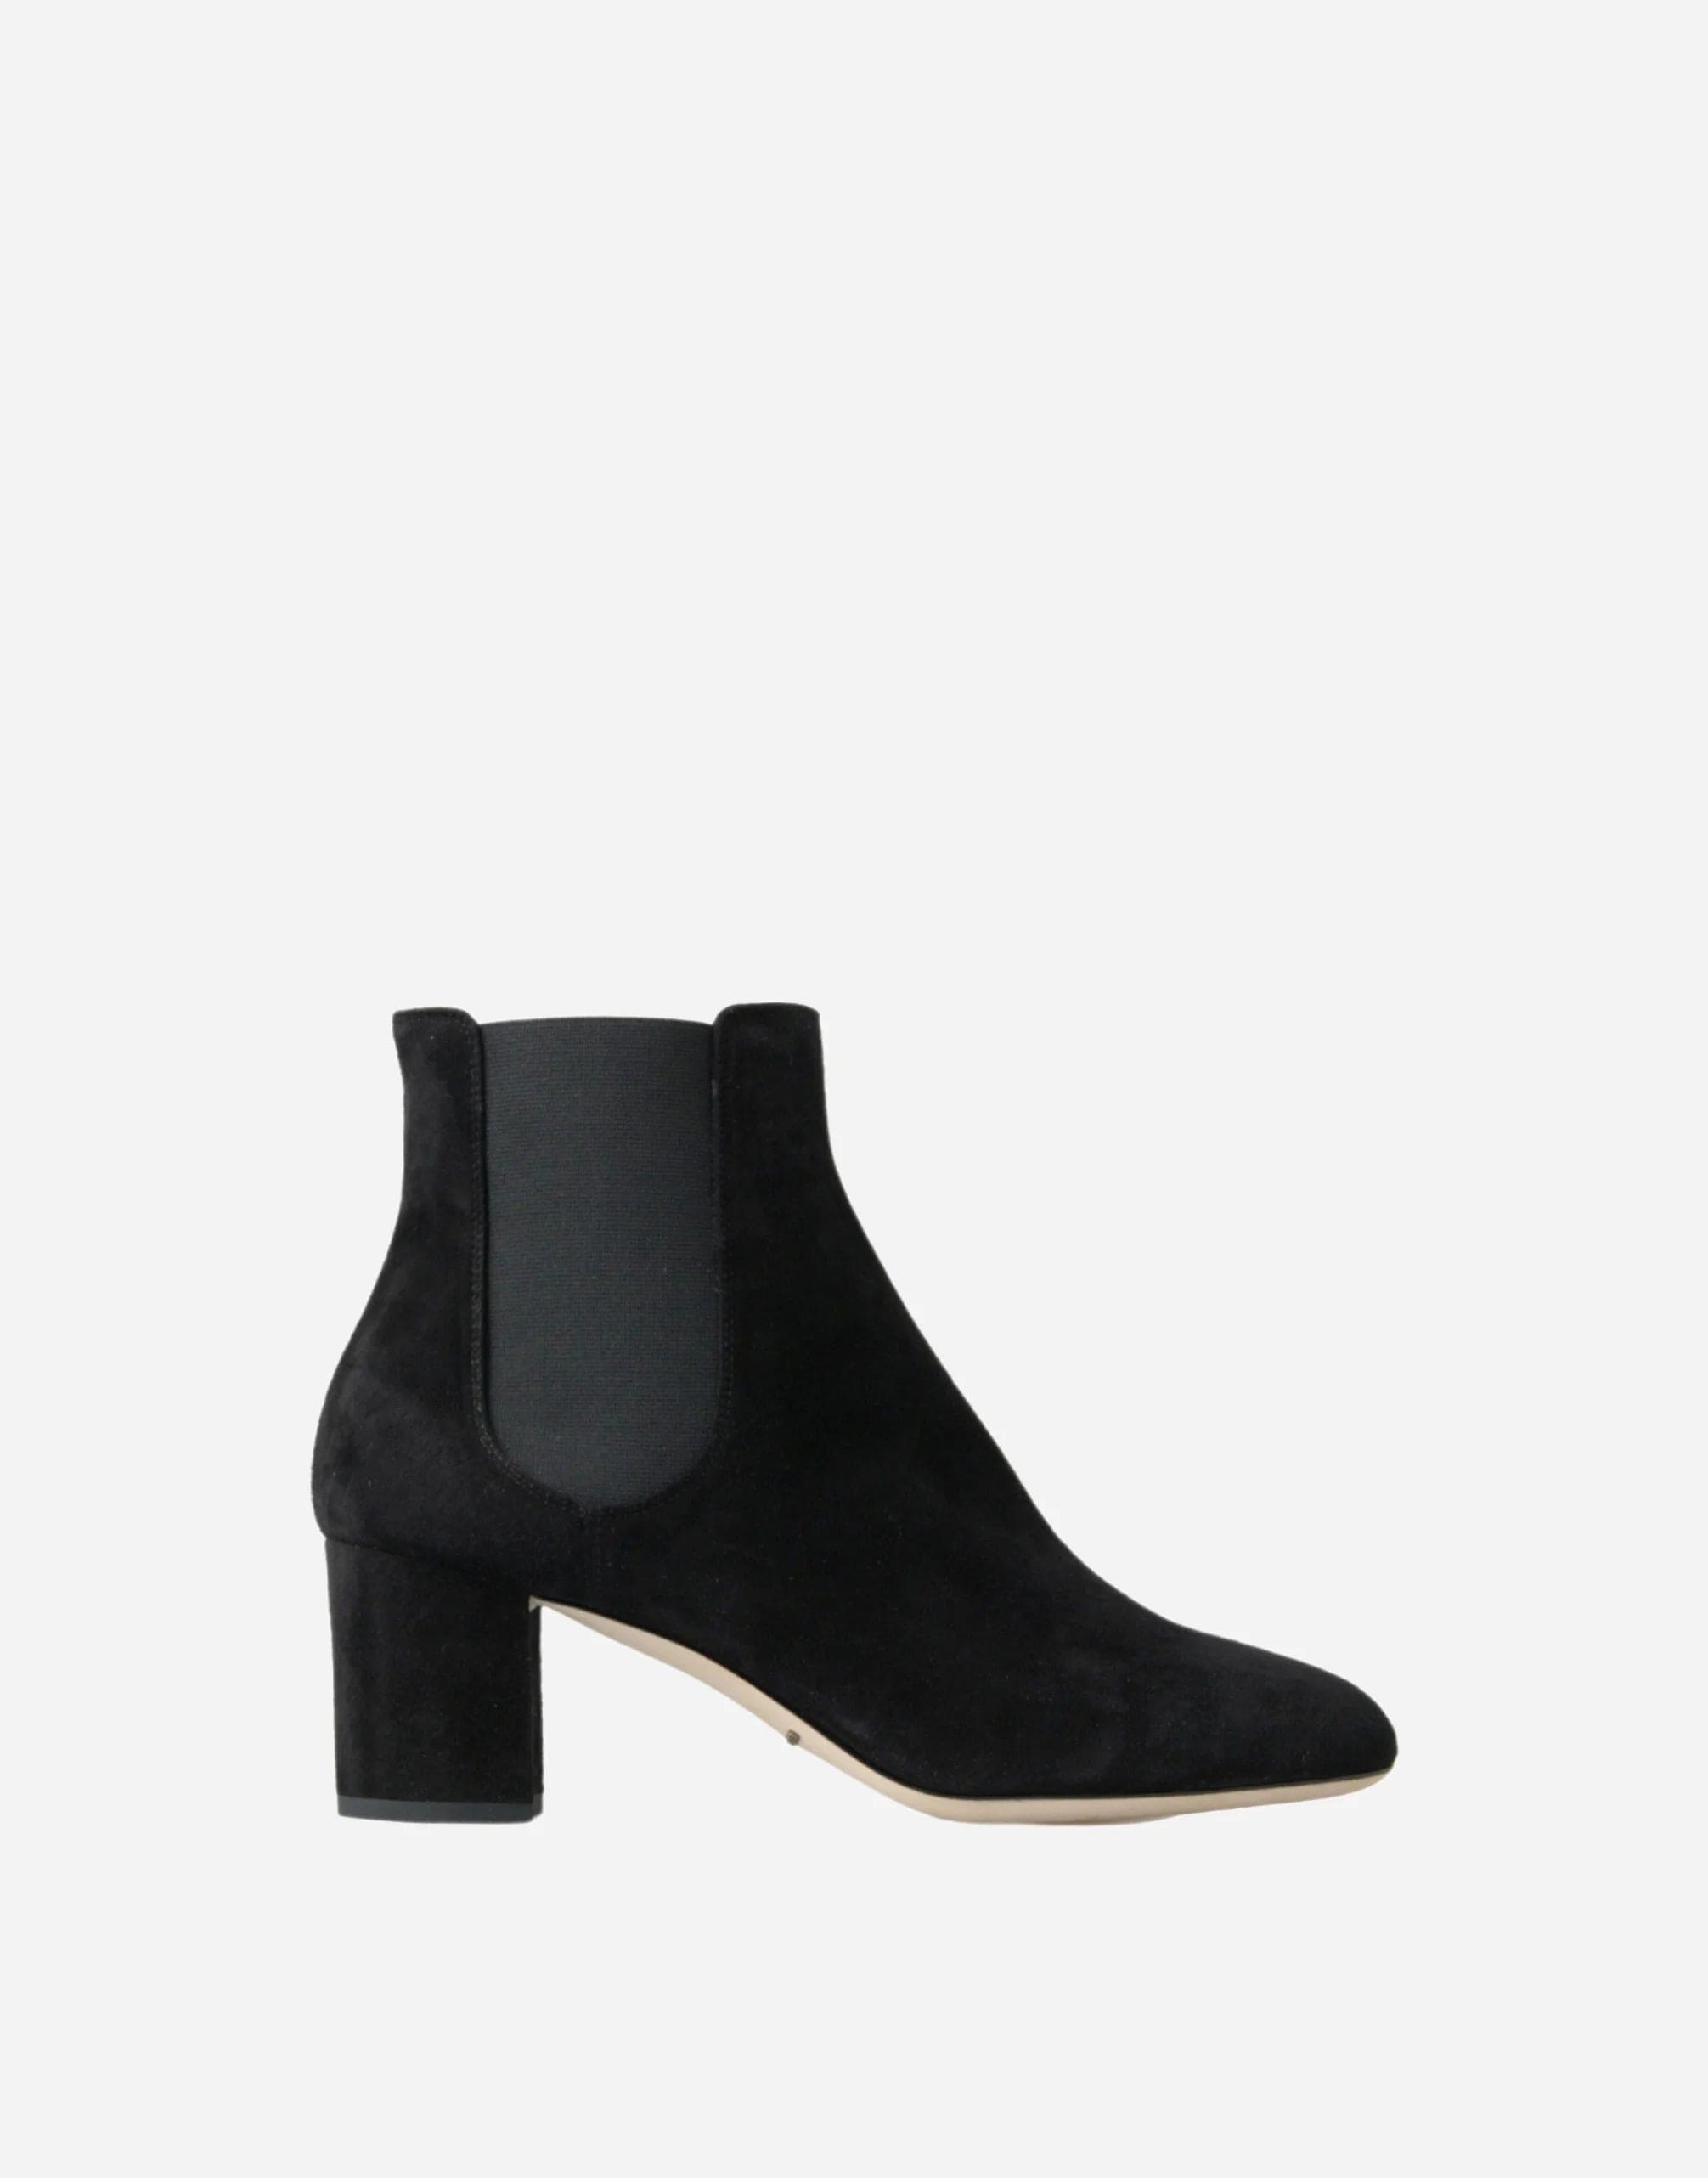 Dolce & Gabbana Stretch Ankle Boots